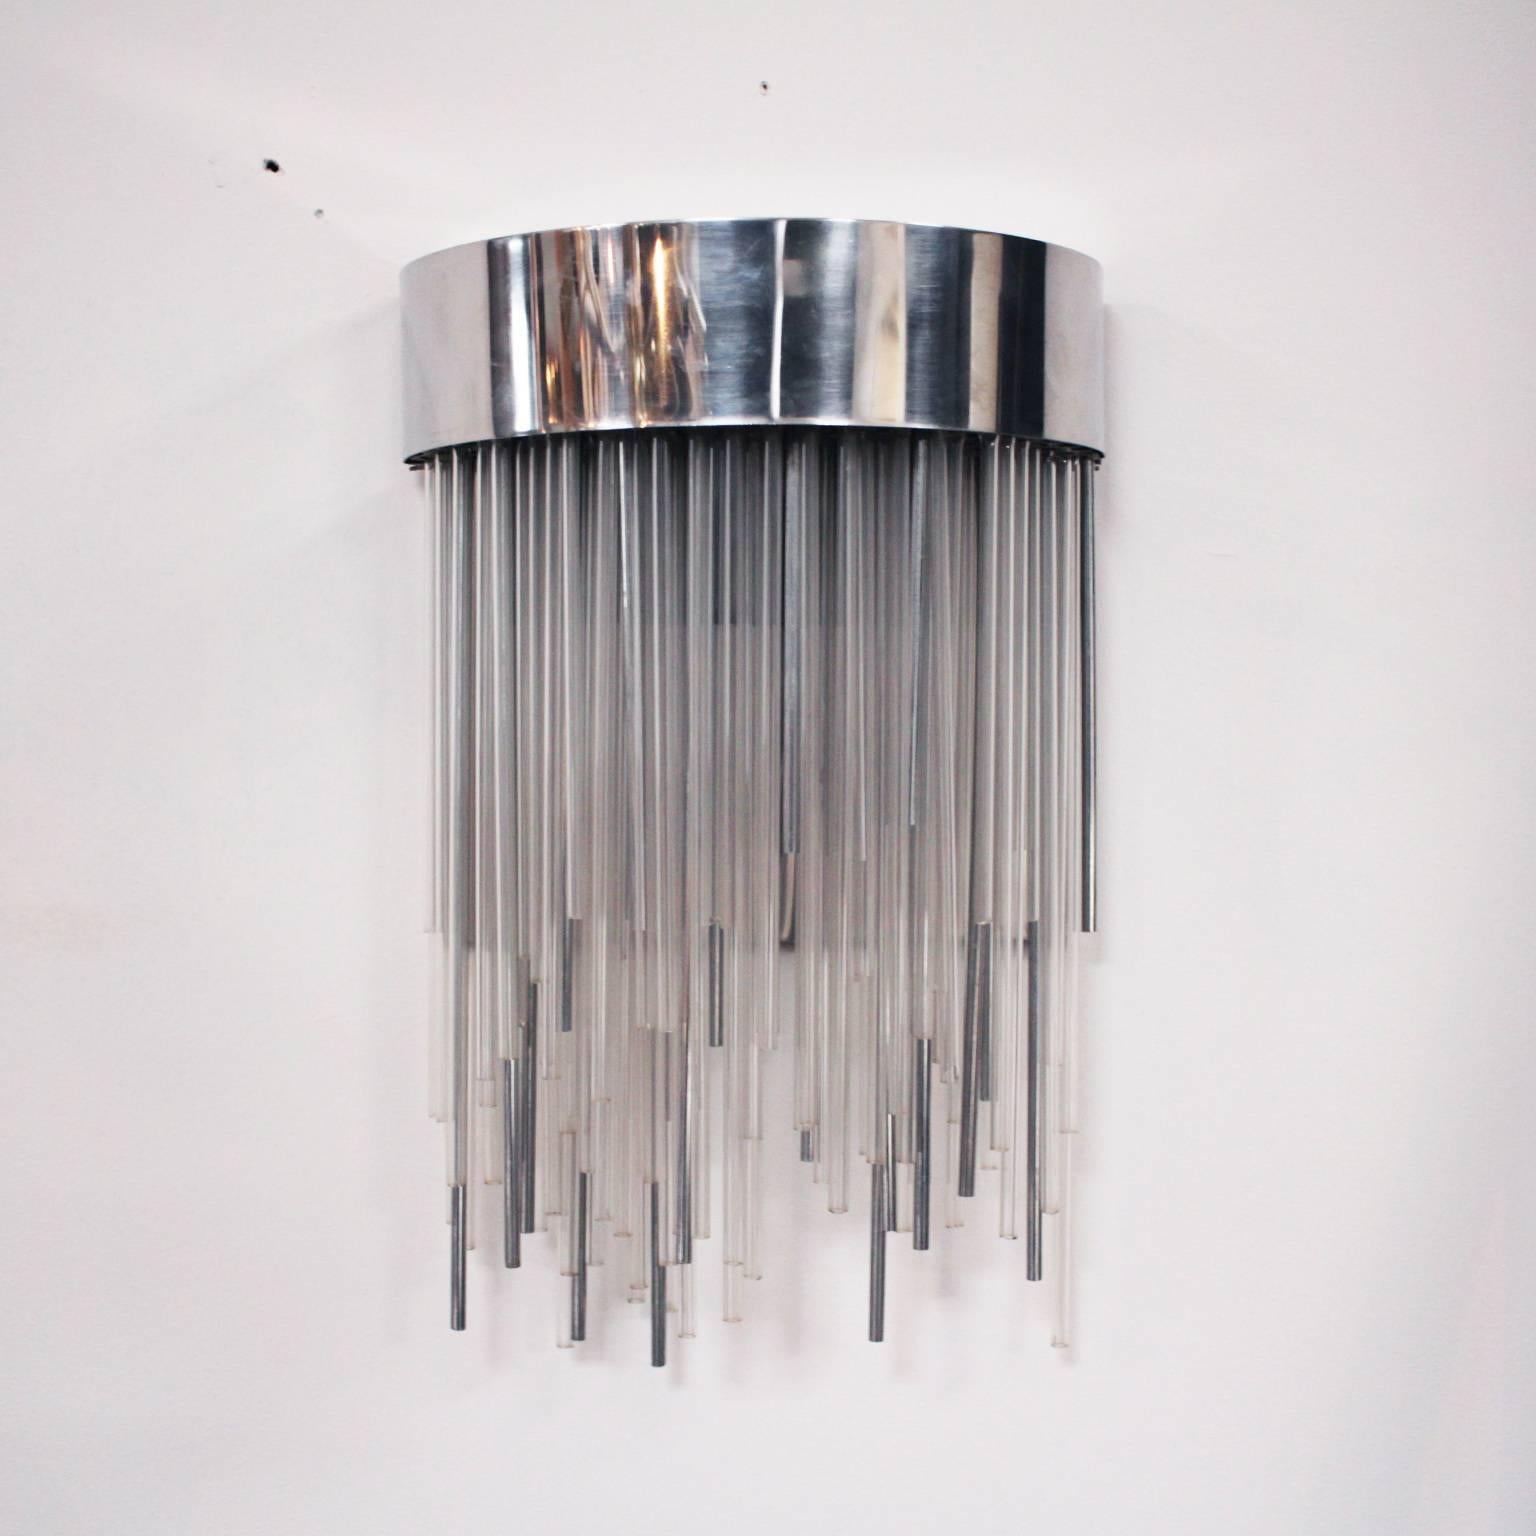 Pair of Italian sconces composed of glass and steel tubes in a half-moon structure.

All glass tubes are in perfect condition, there a few marks on the chromed metal tube and structure.